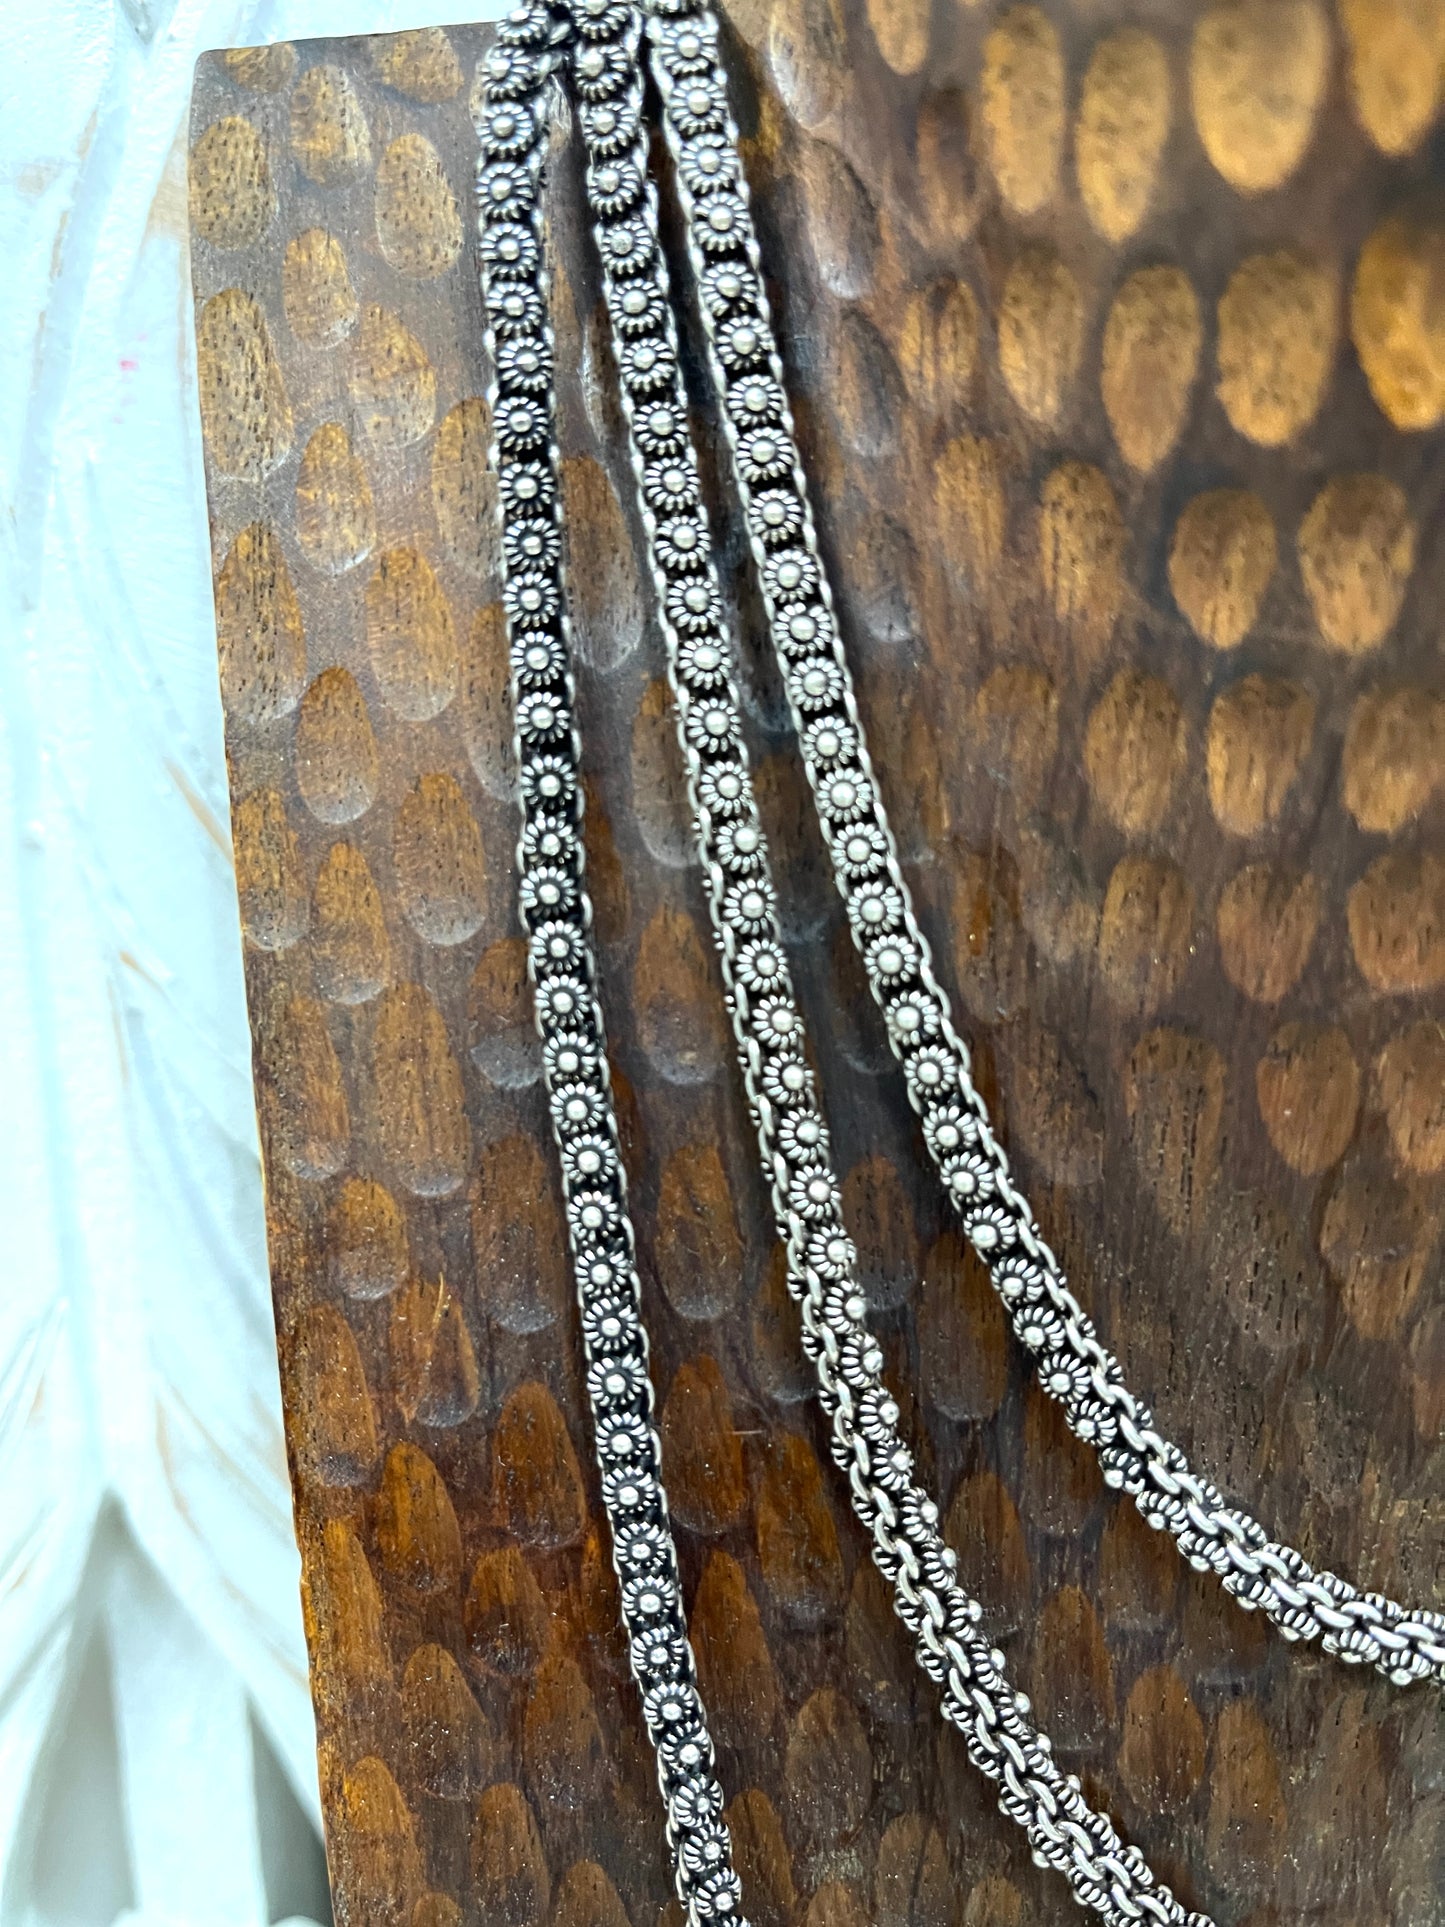 Two sided Thai Oxidized Chains - 16"-24"